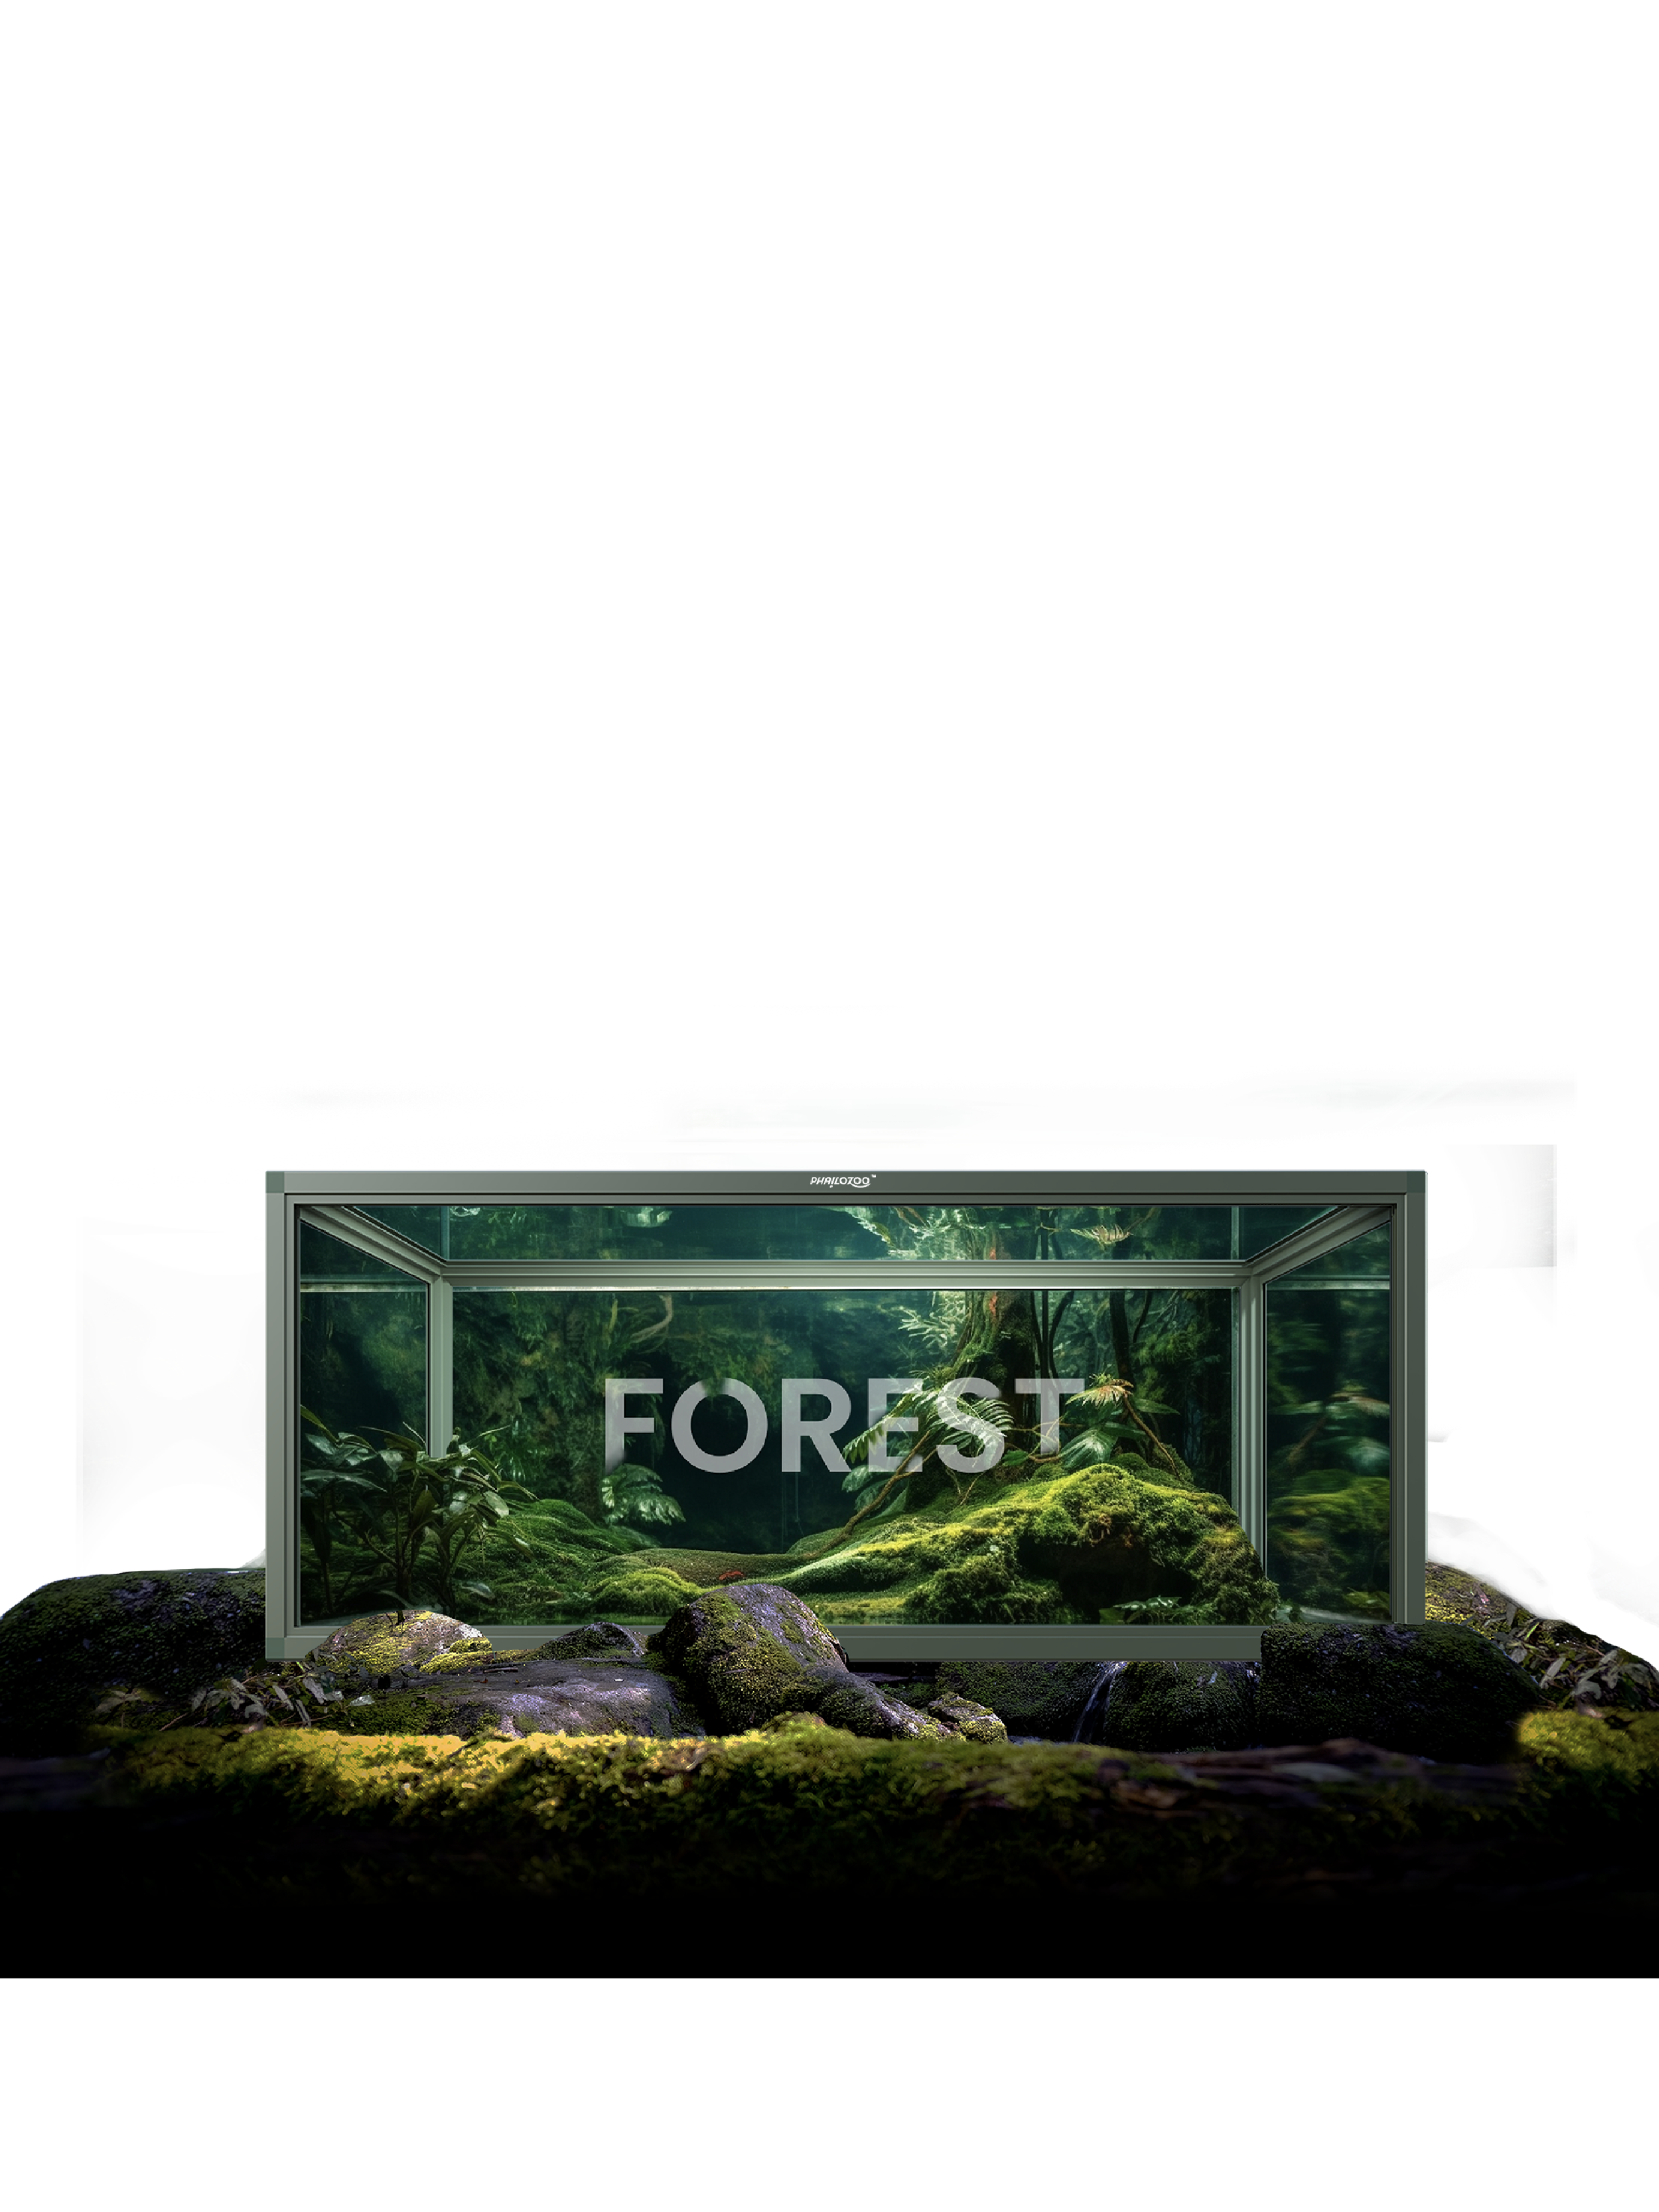 50 gallon reptile tank with forest decoration for reptiles in Phailozoo tanks